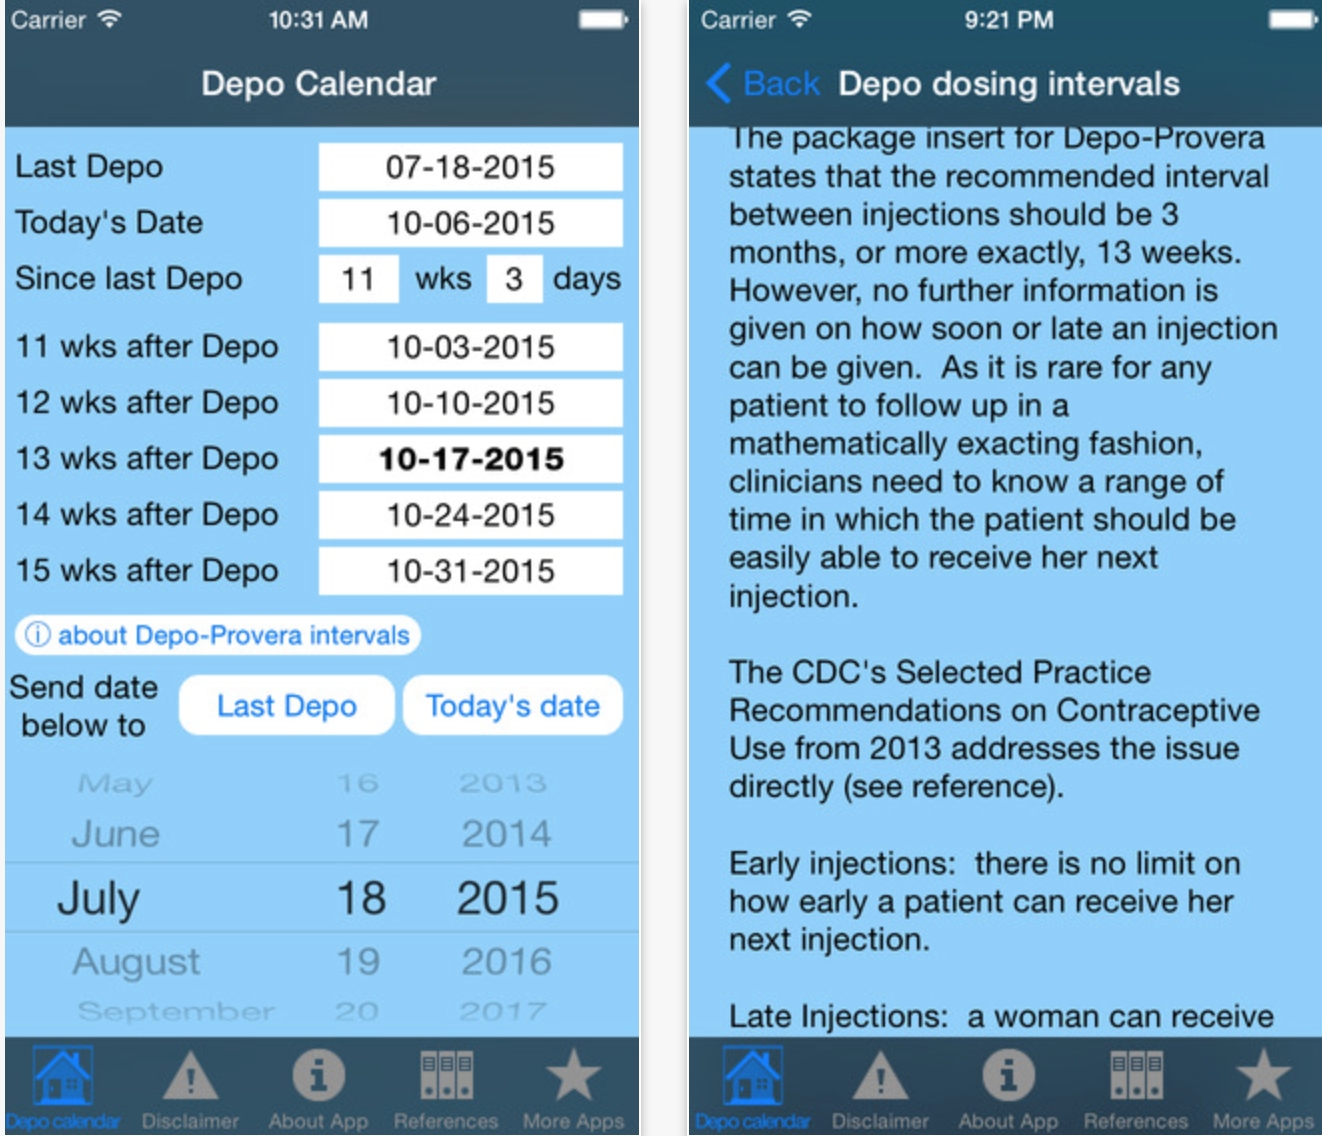 Depo Calendar App Could Significantly Improve Contraception intended for Calendar For Depo Provera Injections